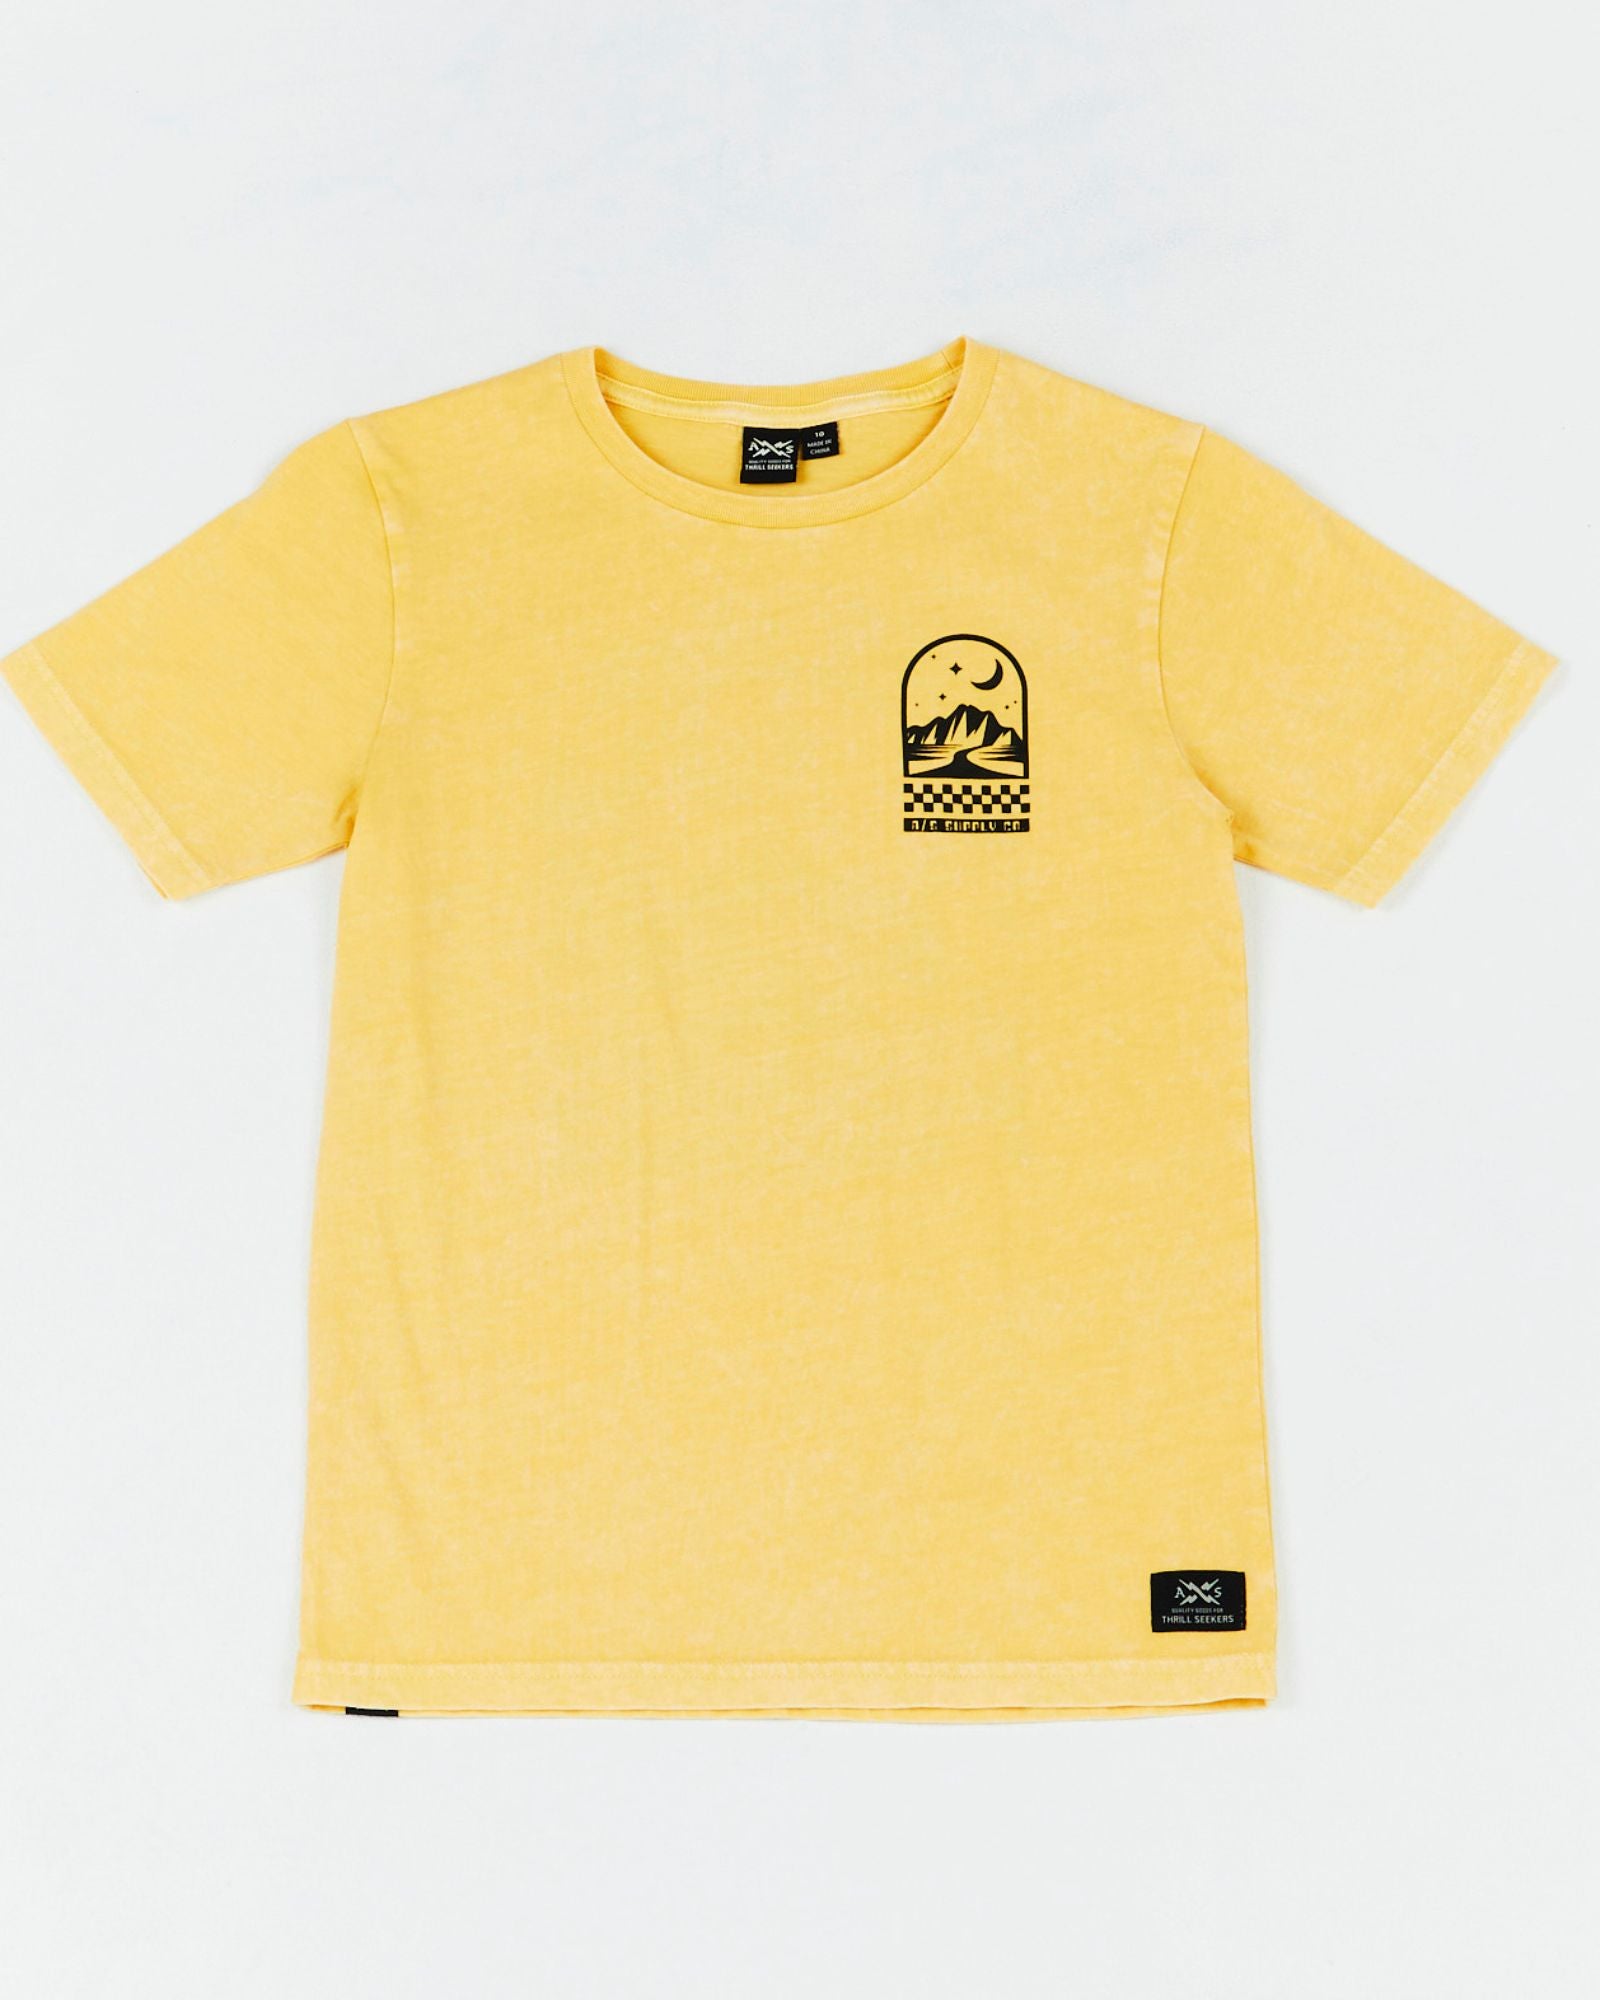 Alphabet Soup's Teen Mystical Tee in washed yellow cotton jersey for boys ages 8-16. Featuring a rad print “Take The Road Less Travelled” design on front and back, short sleeves, crew neck, and straight hemline.